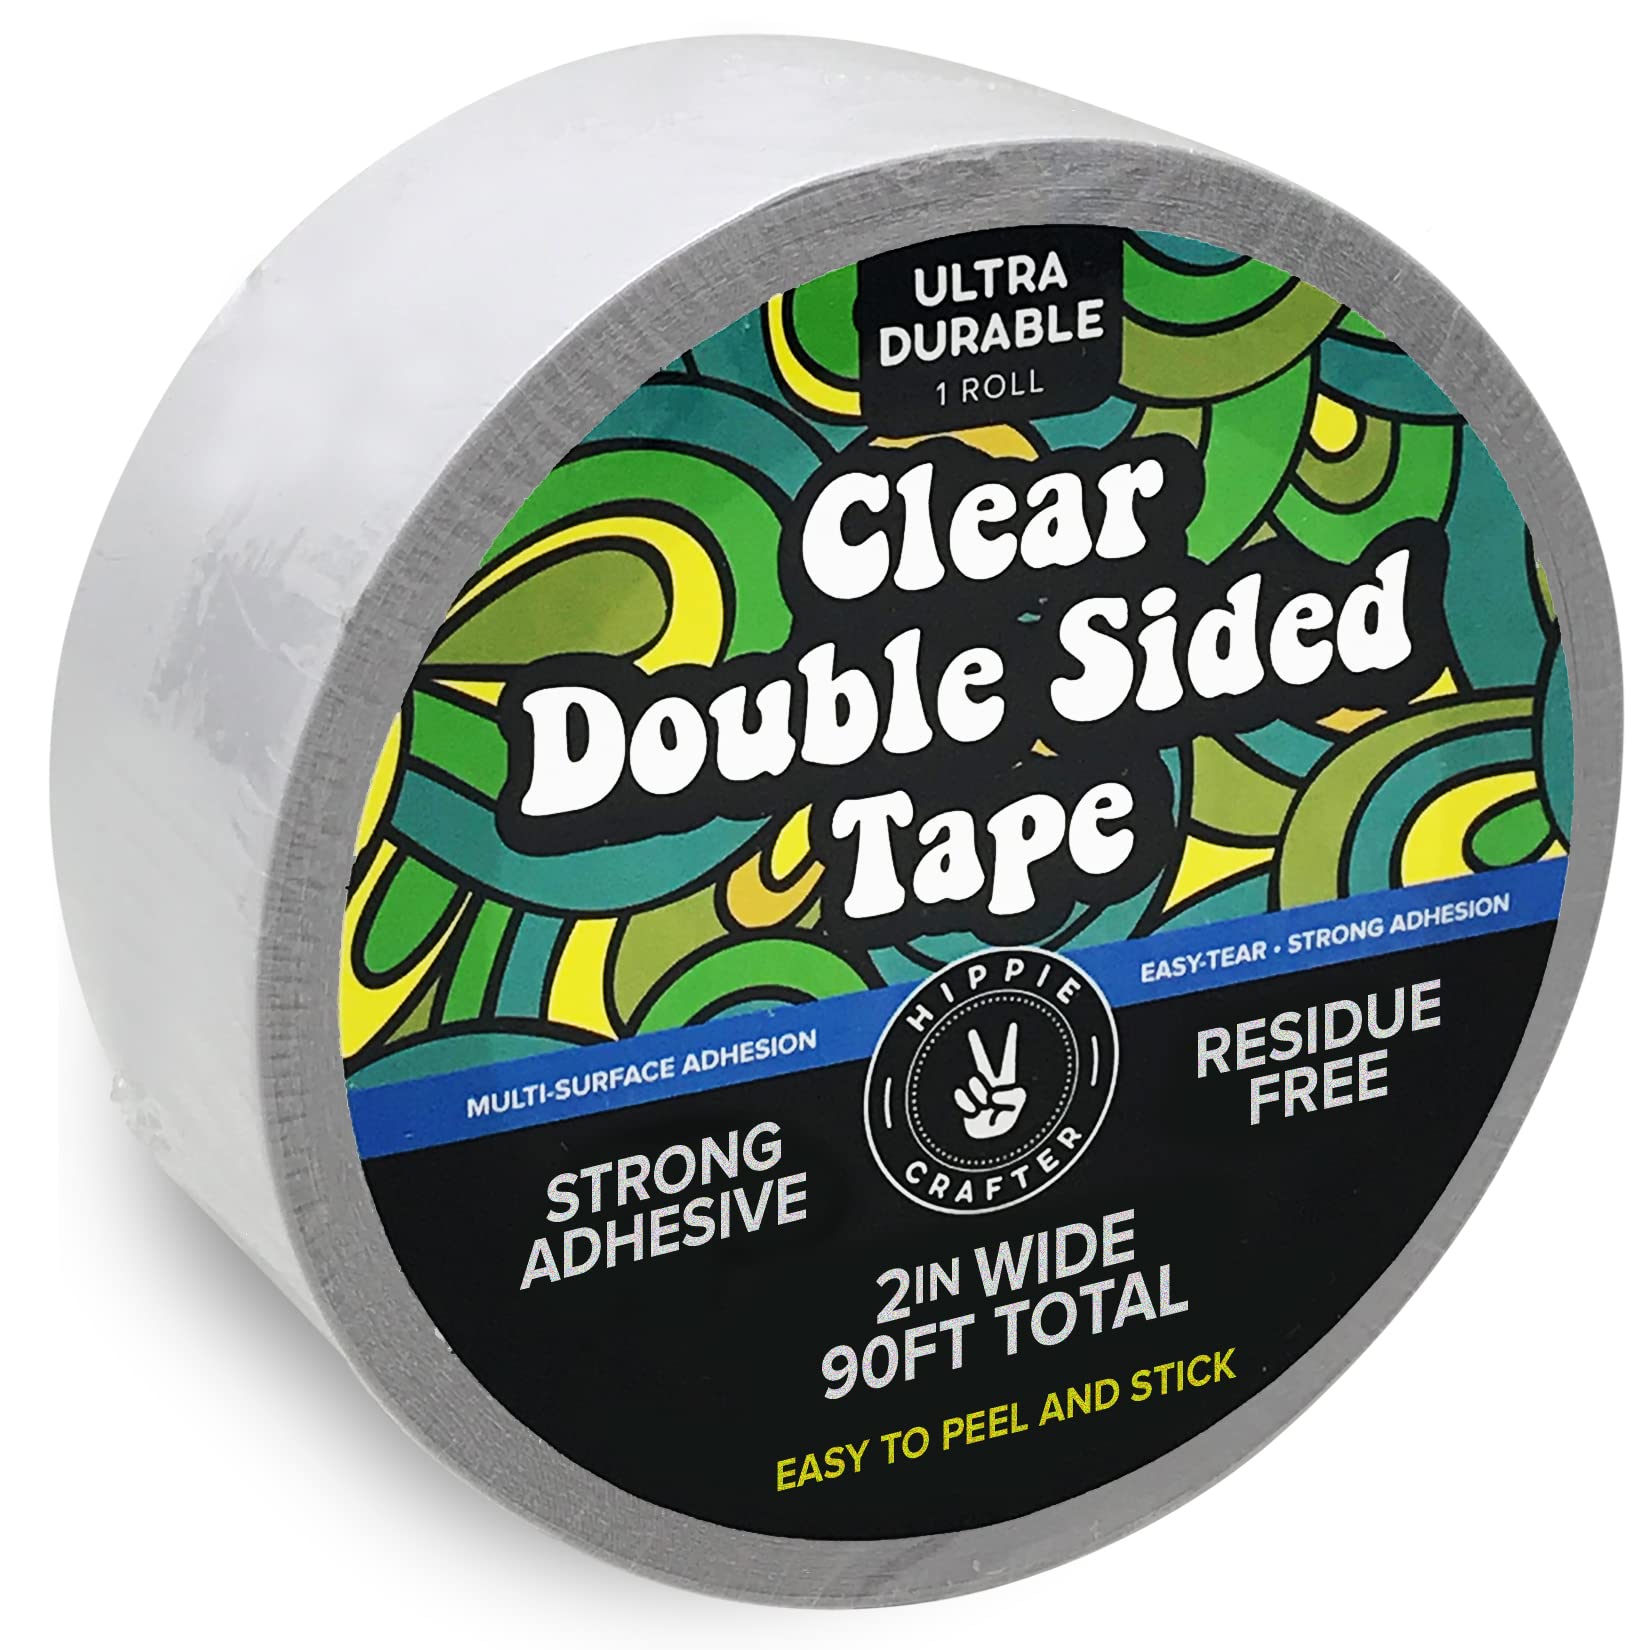 Acid-Free Double Sided Tape: Easy Tear 2 Sided Glue Adhesive Tape